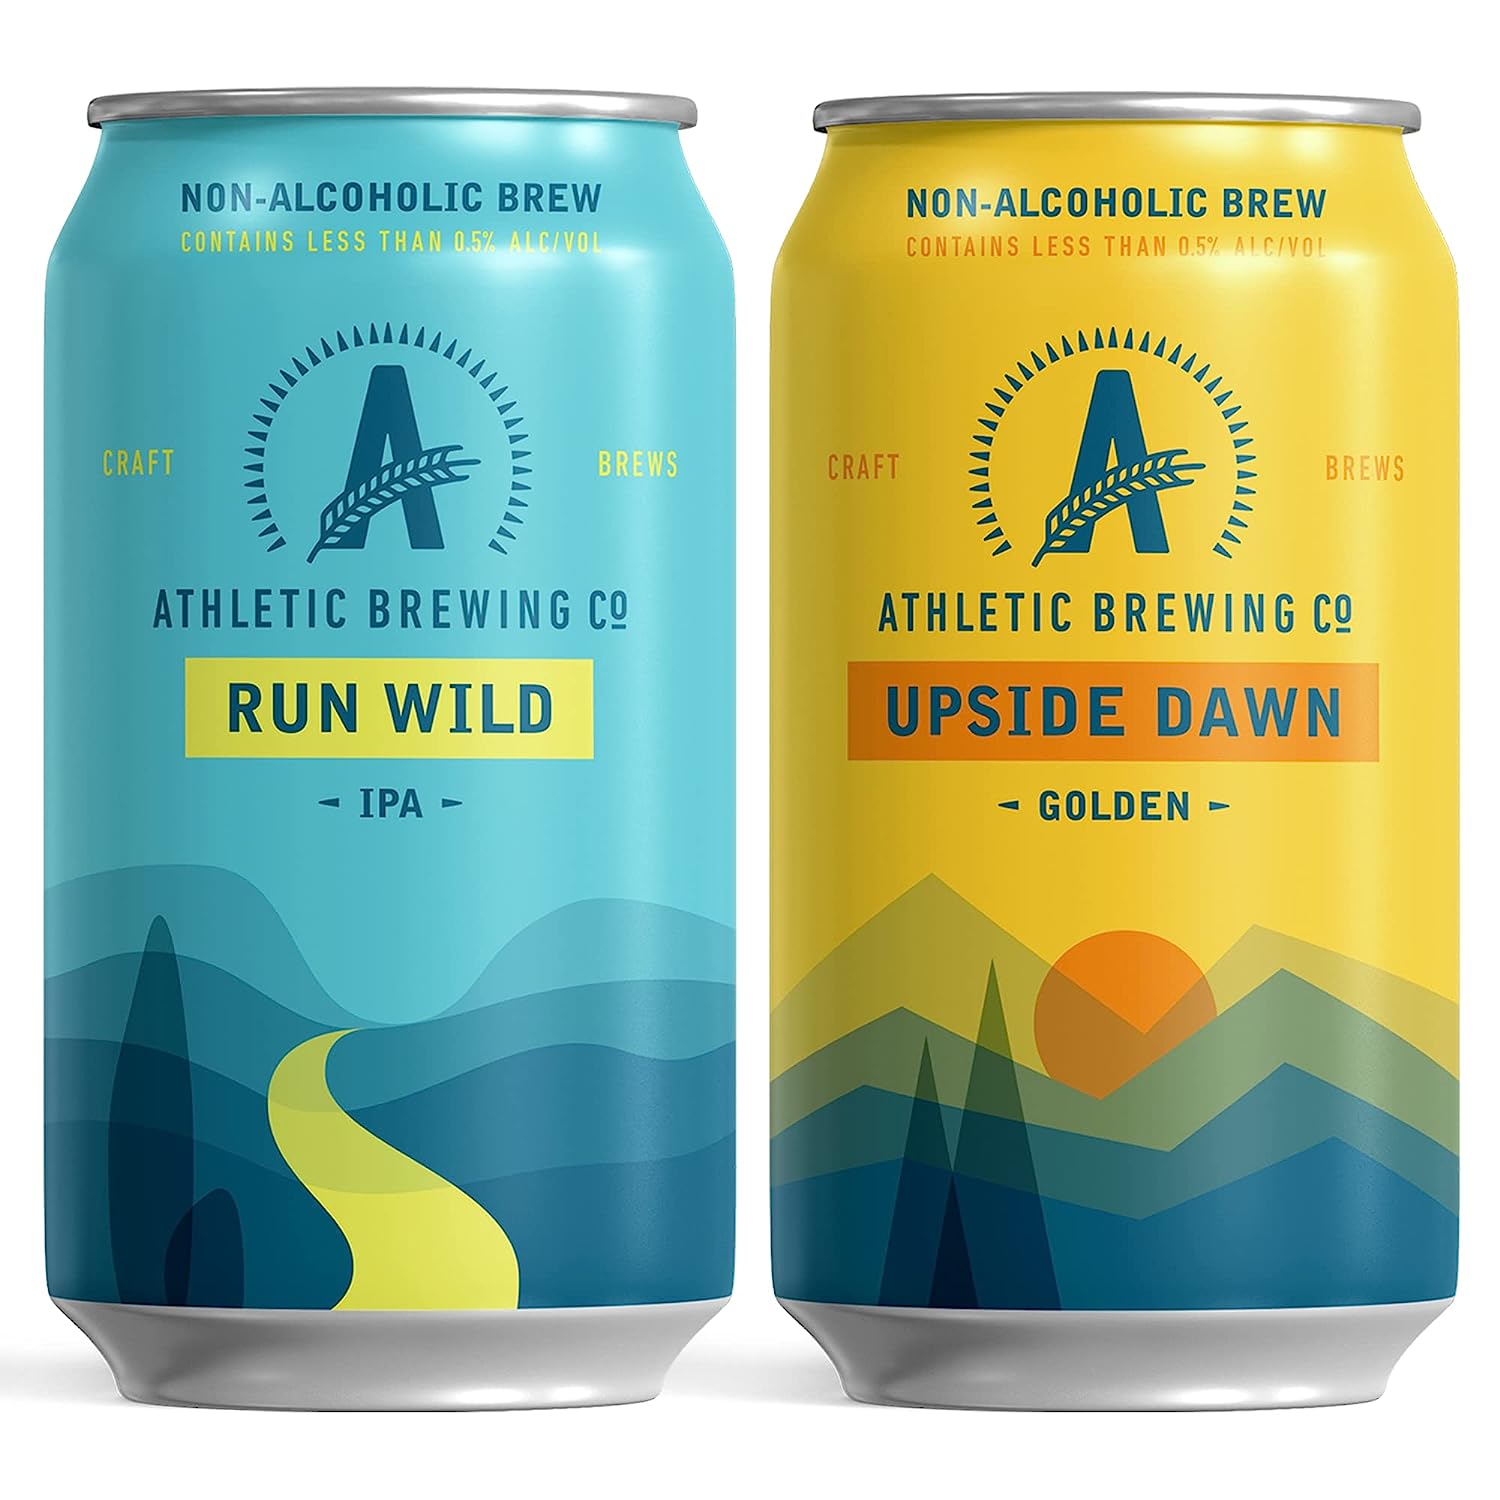 Athletic Brewing Co's Run Wild IPA & Upside Down Golden Cans